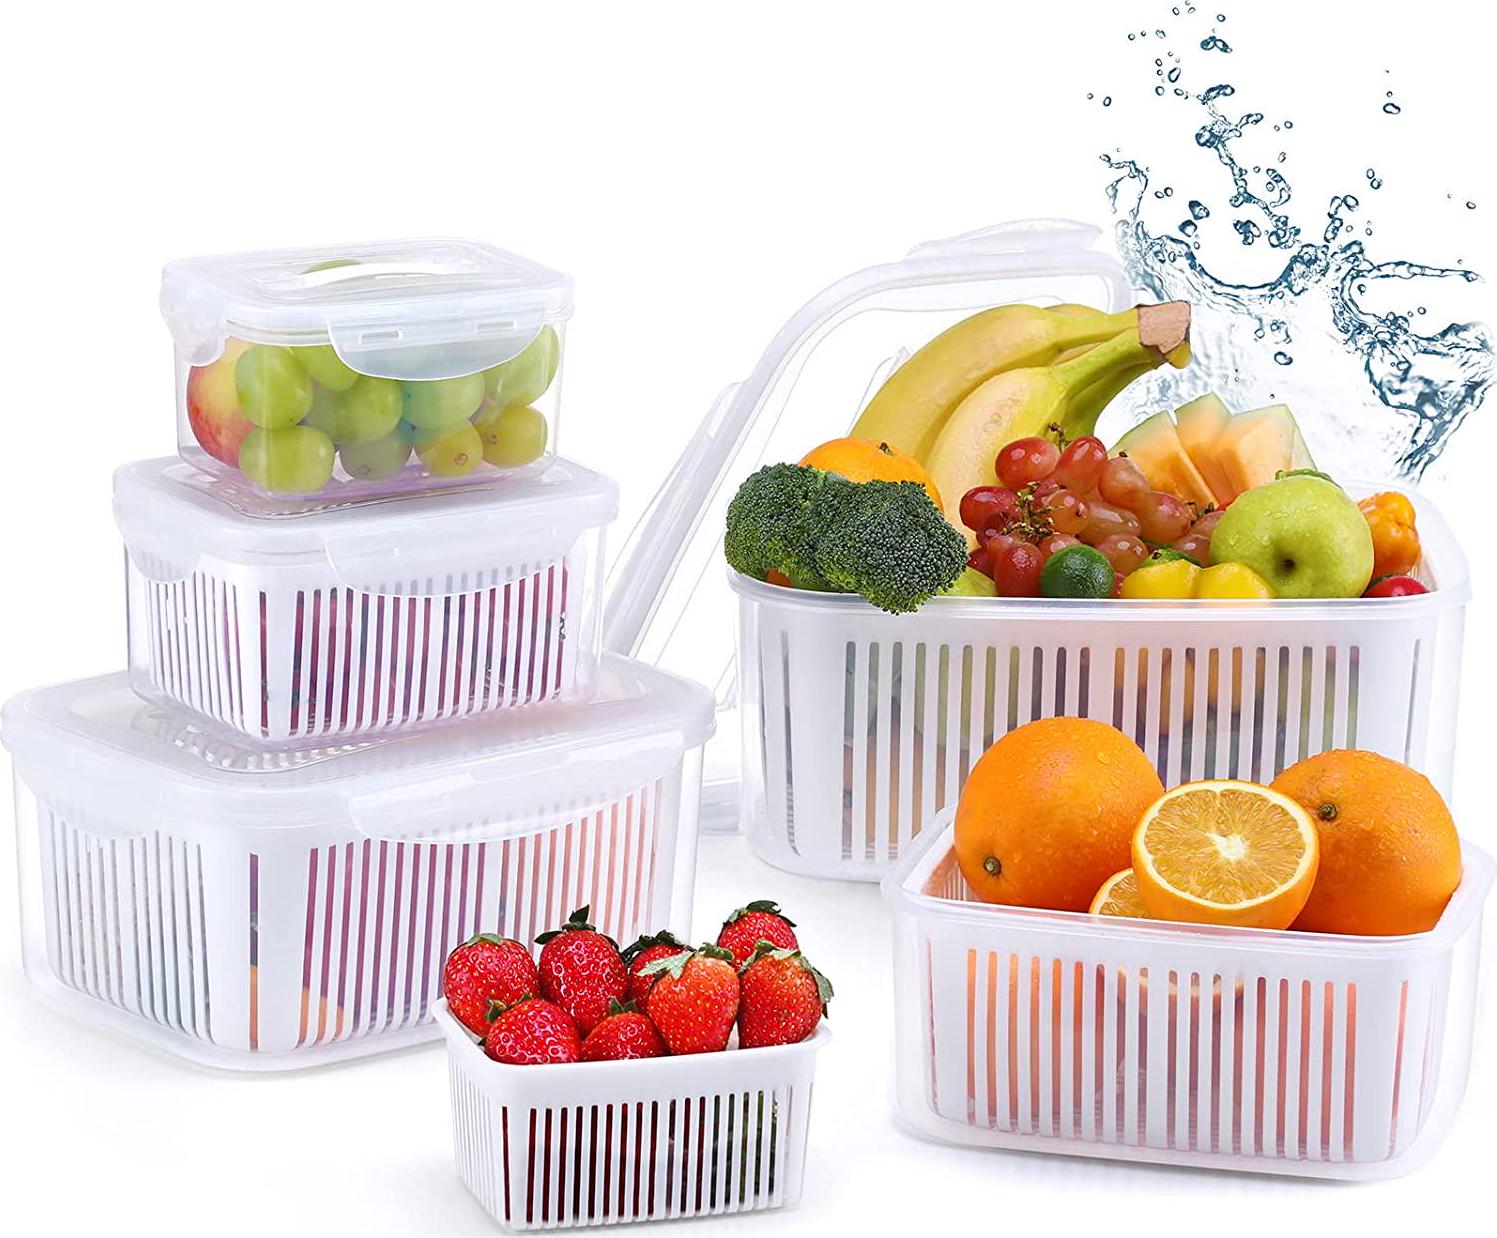 Luxear, Fruit Vegetable Produce Storage Saver Containers with Lid and Colander | LUXEAR 5 Packs BPA-Free Plastic Fresh Keeper Set | Refrigerator Fridge Organizer | for Salad Berry Lettuce Food Meat Fish Celery